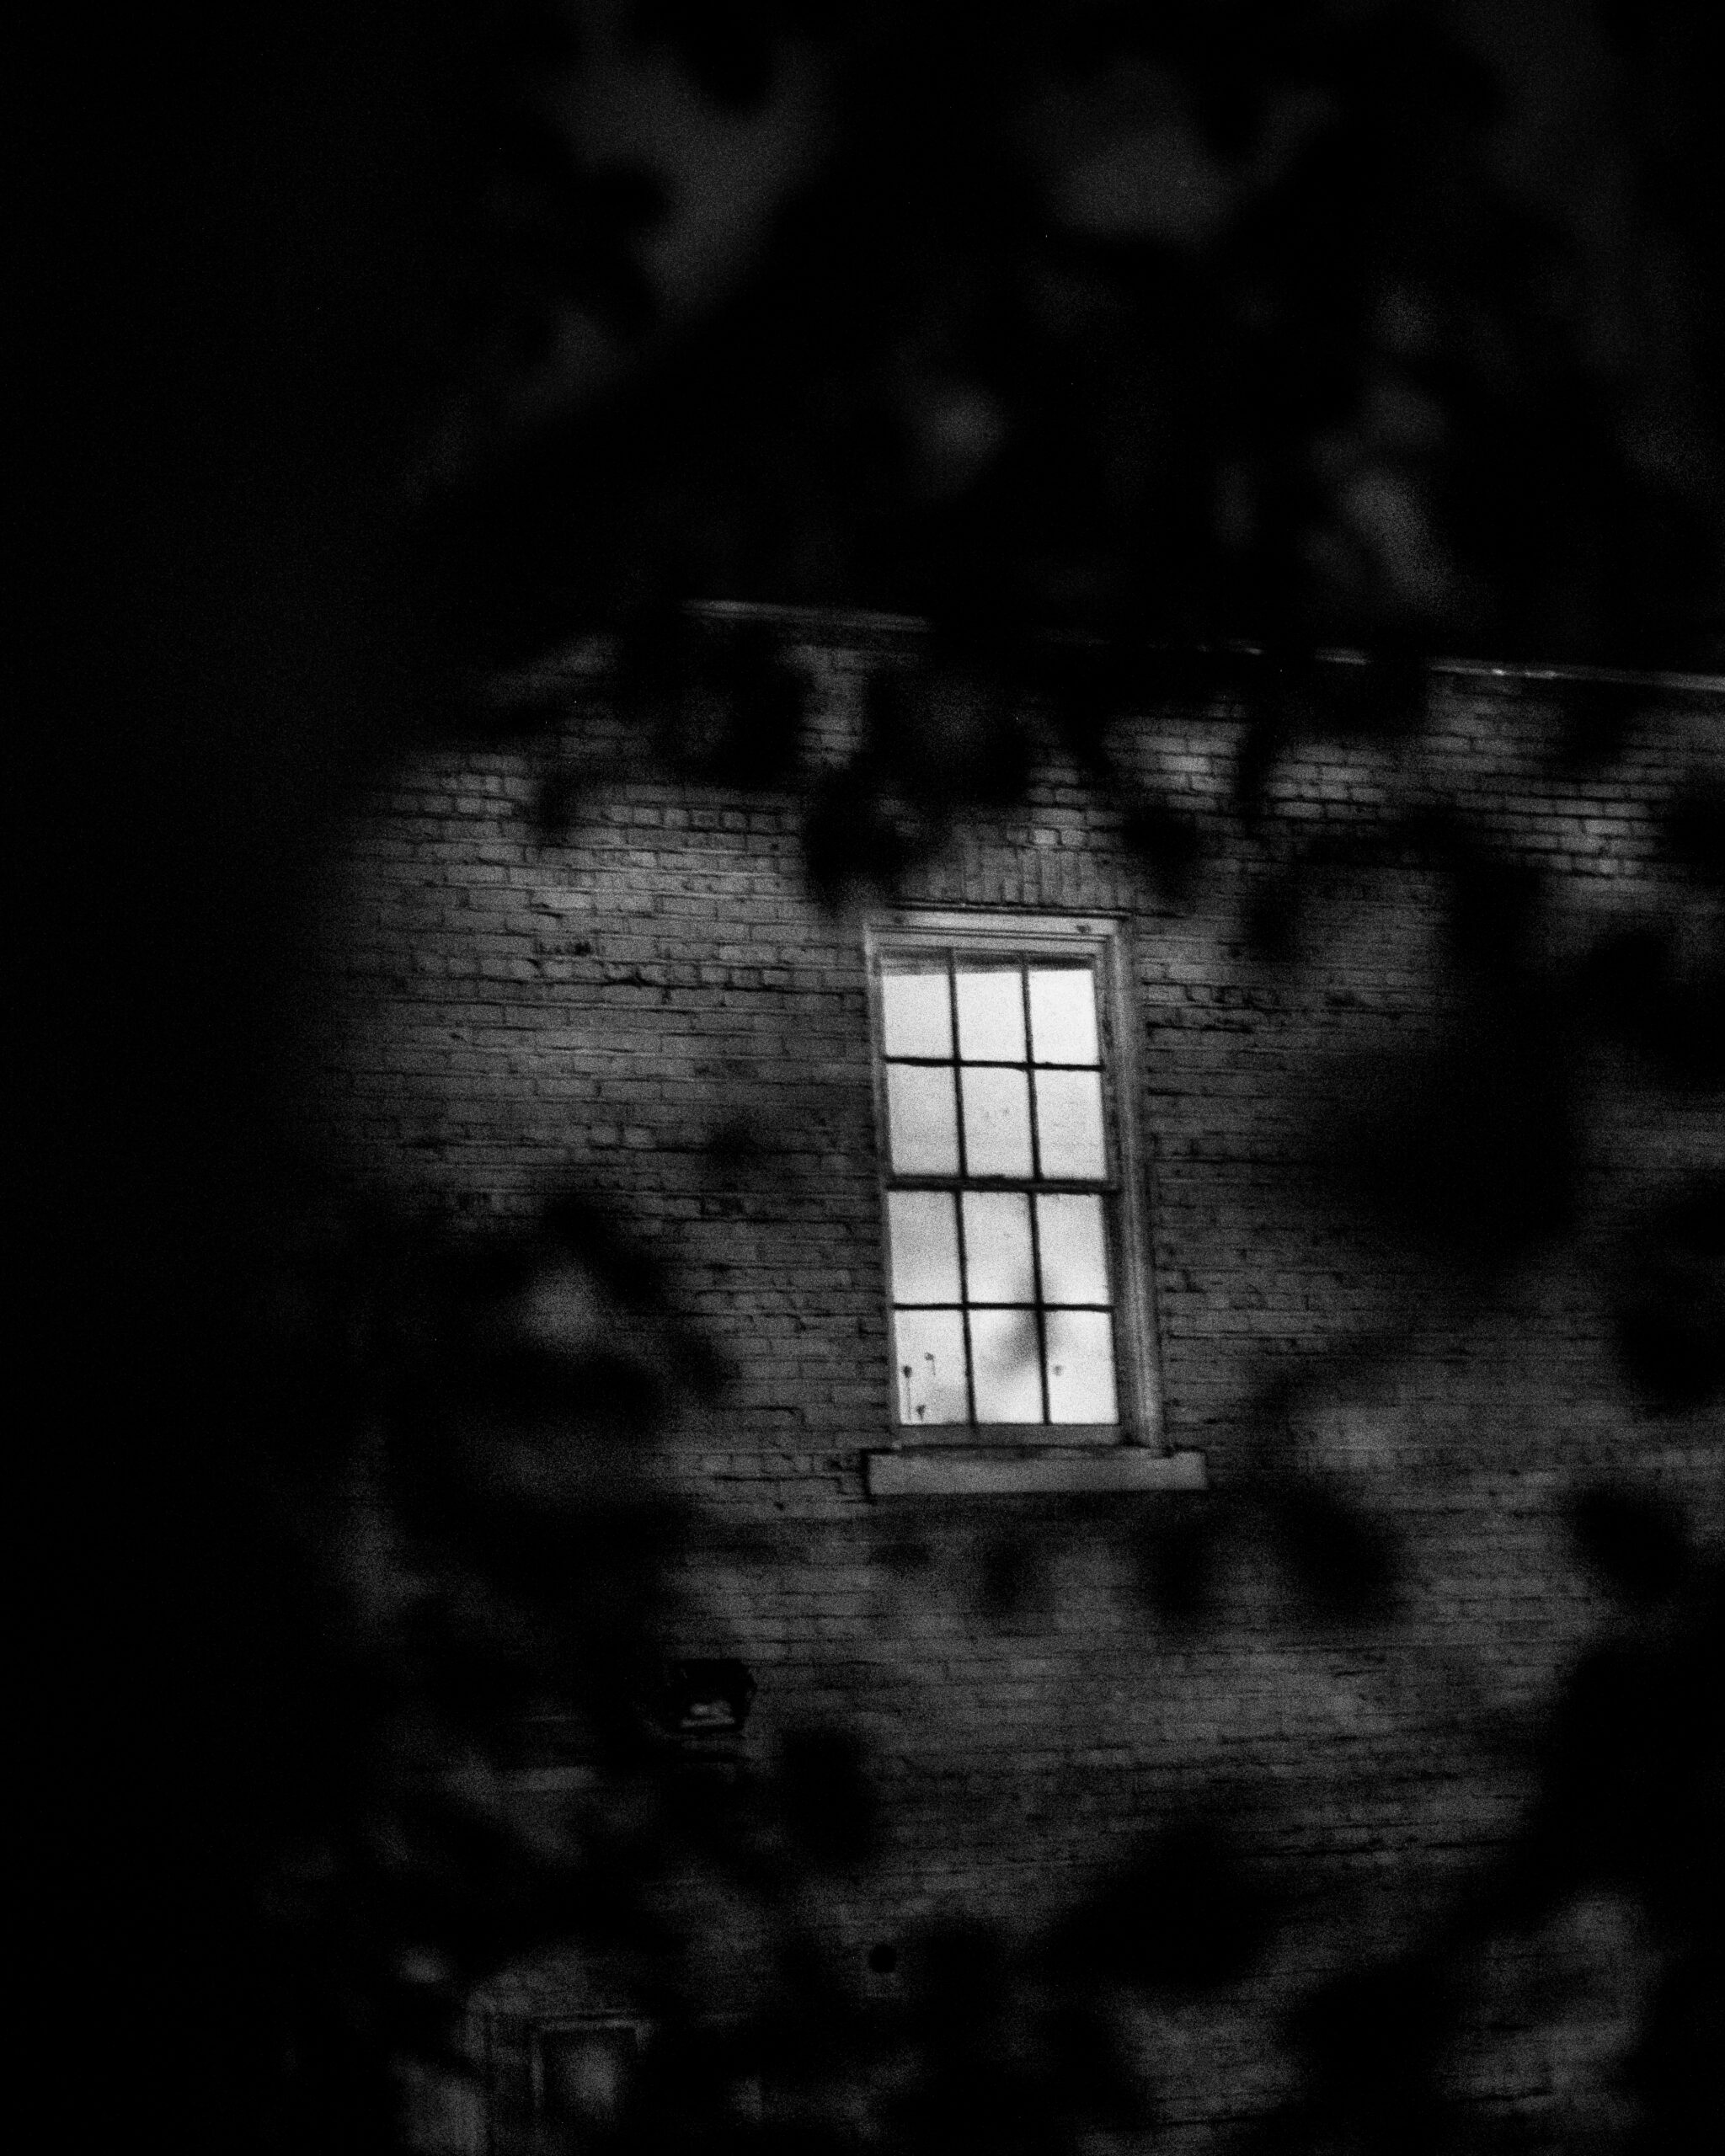 Light pours from the glass window, AGE of Central Texas Building, previously the Confederate Women’s Home in Austin, Texas, with a spooky feel to the black and white picture.